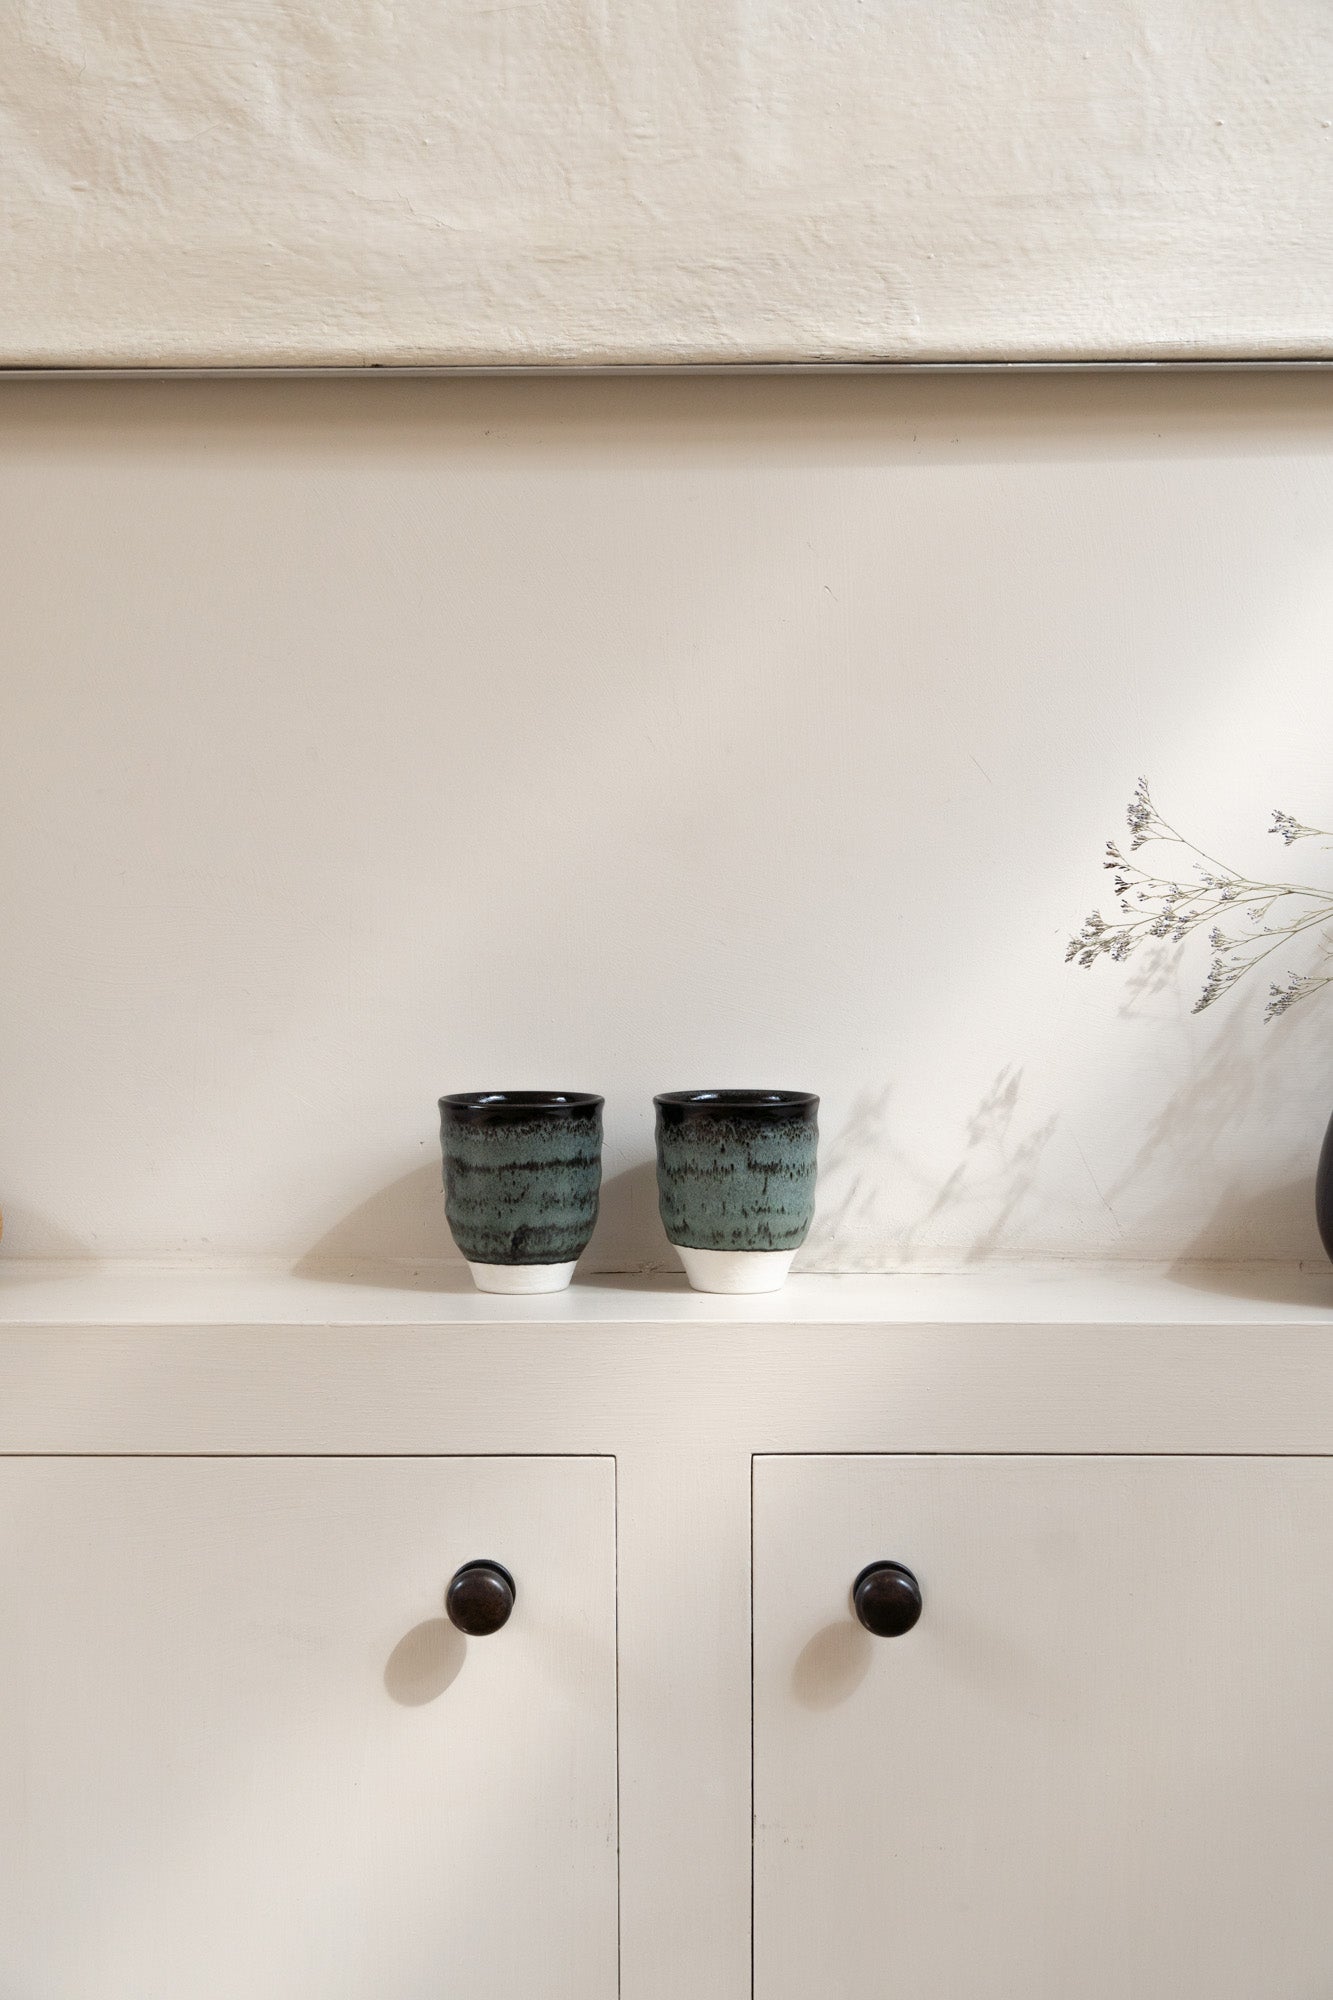 Two Dashi Tumbler in Charbon set on wall cabinet in light white and fresh interior.